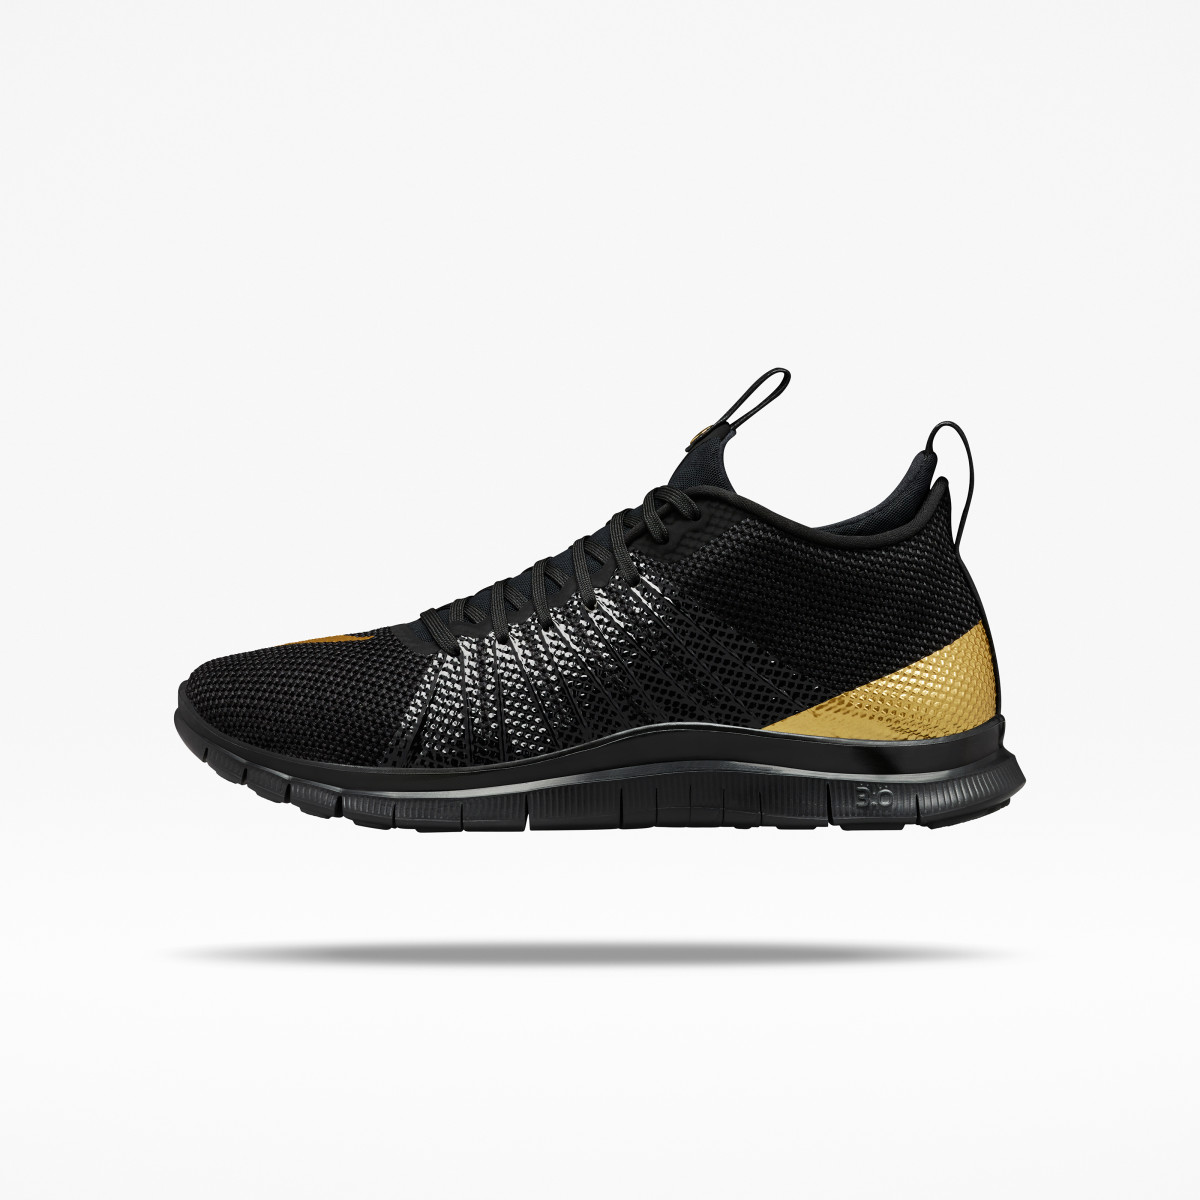 Olivier Rousteing gilds some Nike's most famous football silhouettes ...